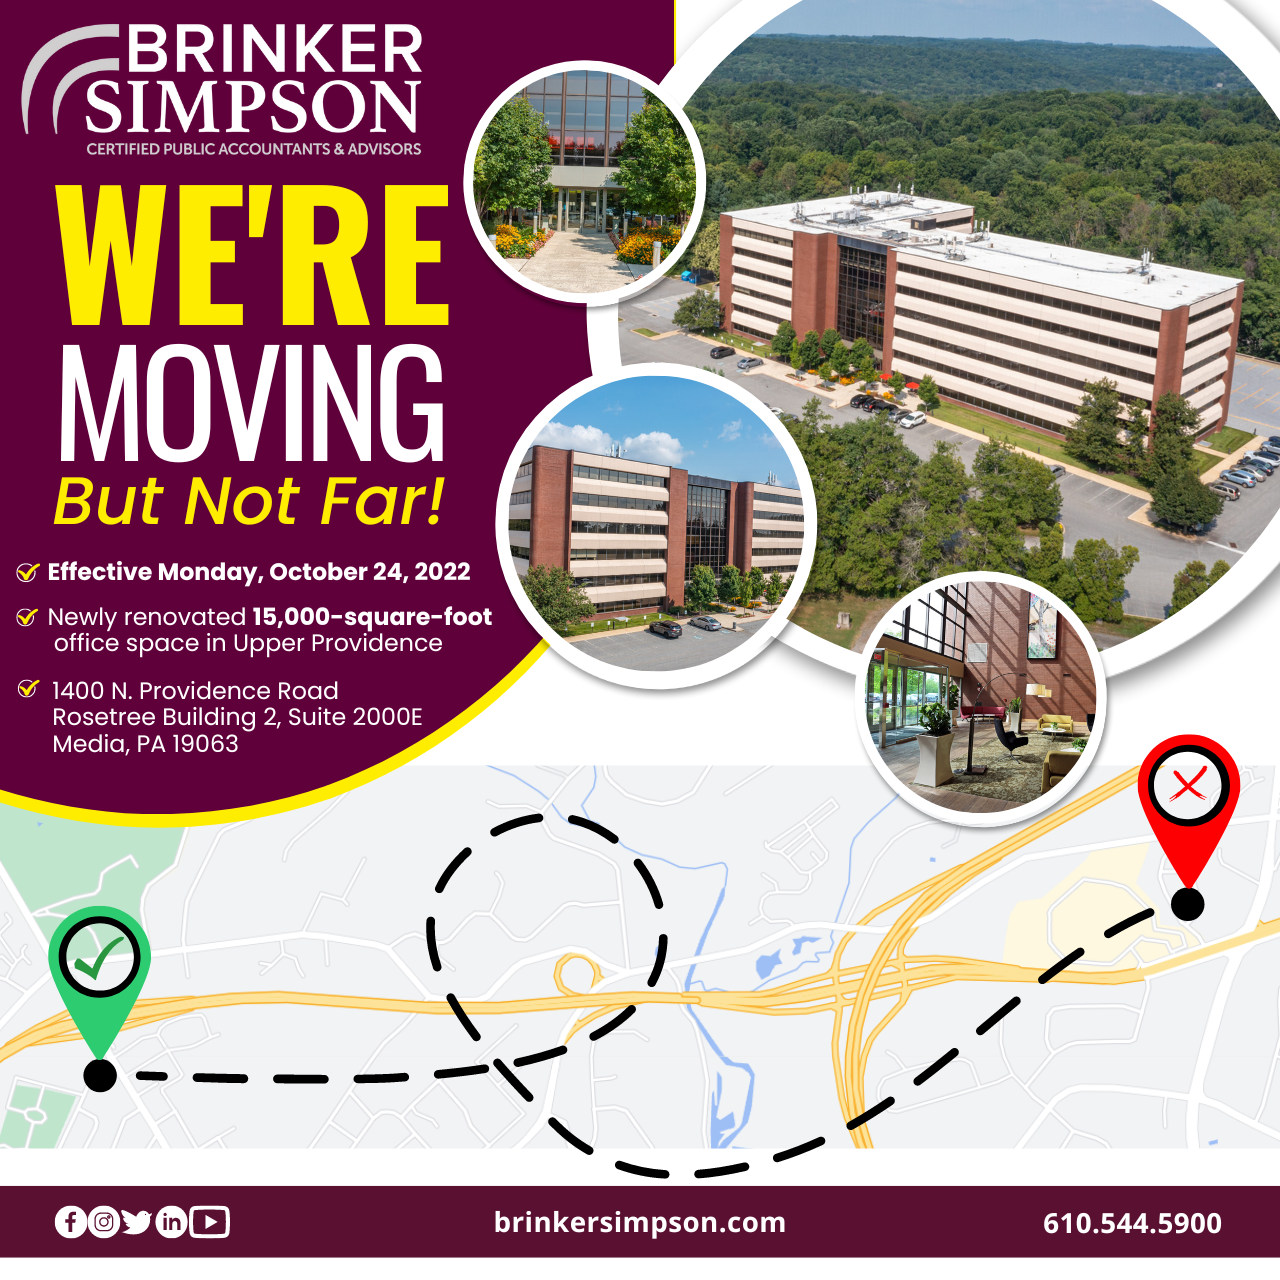 Brinker Simpson & Company, LLC, Relocating To Support Continued Growth